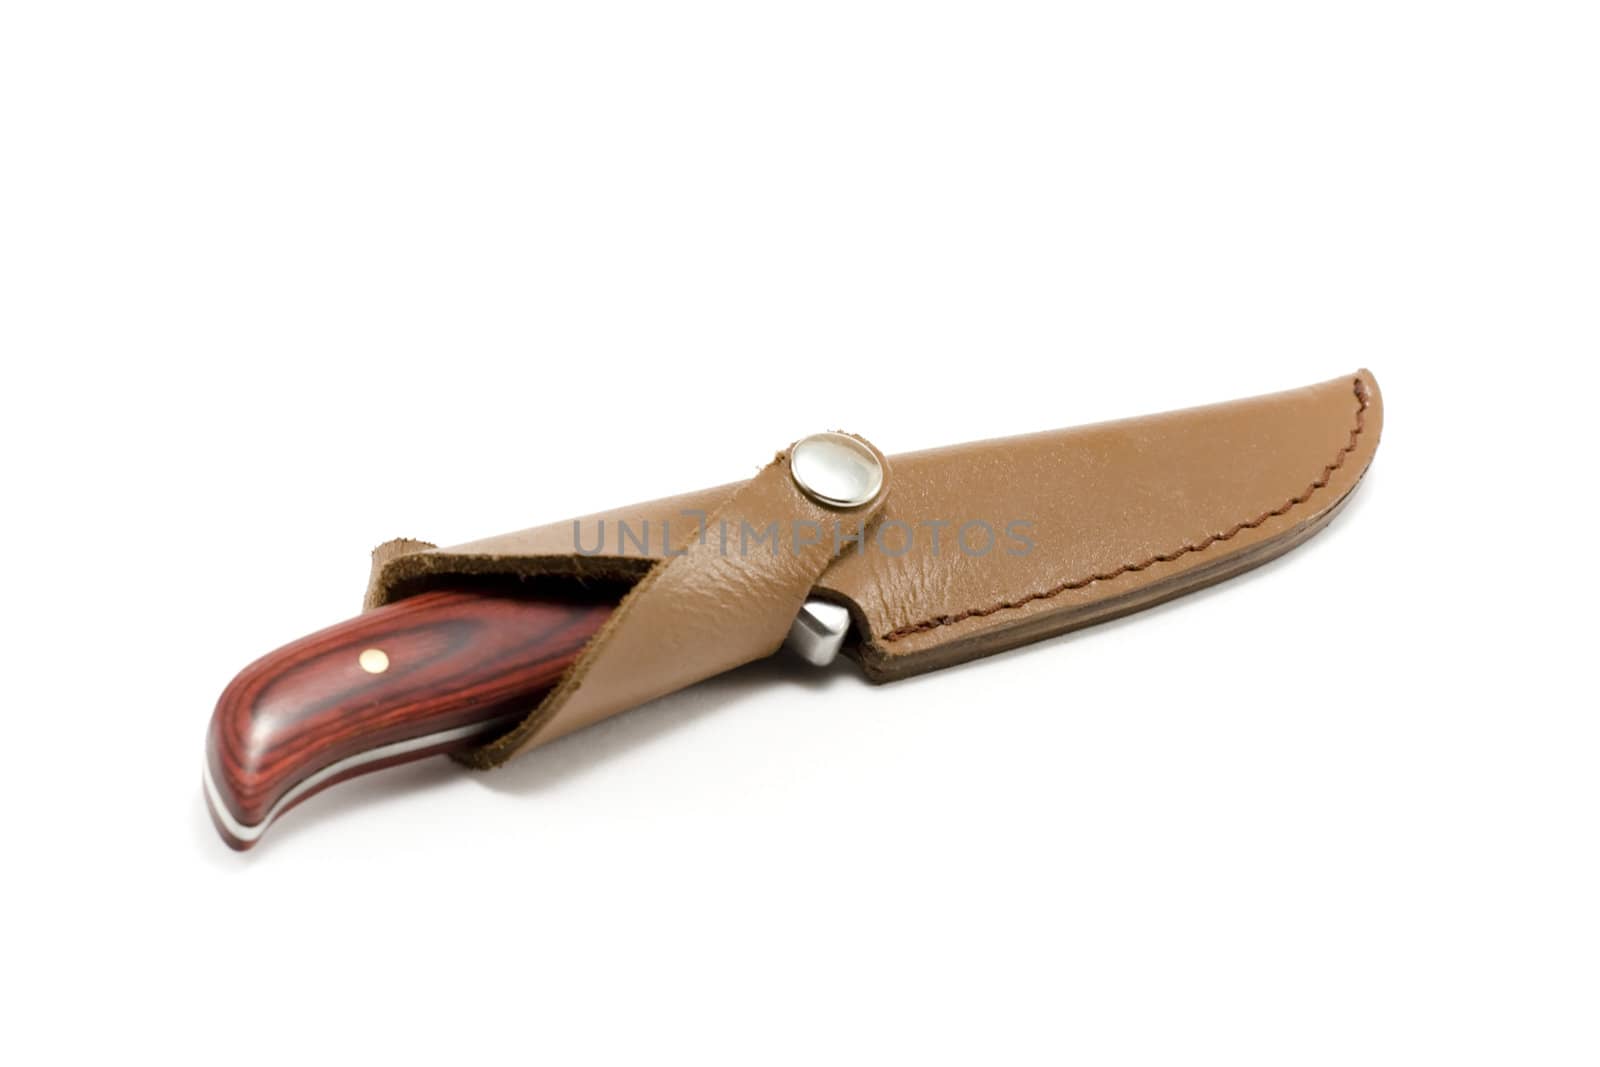 Knife in scabbard insulated on white background